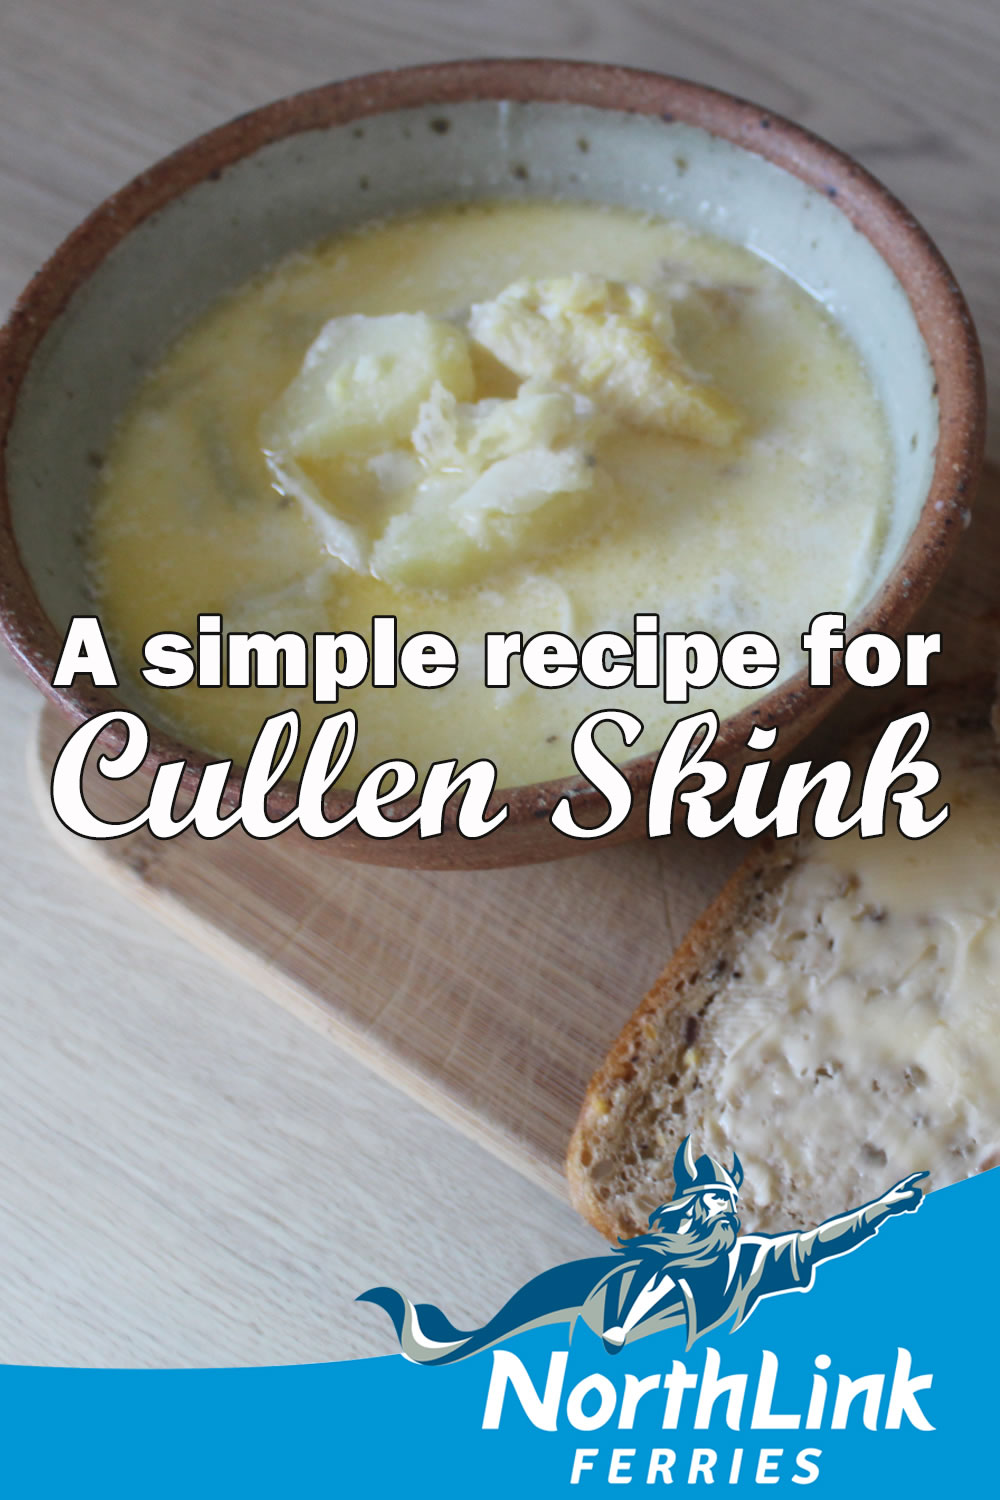 A simple recipe for Cullen Skink